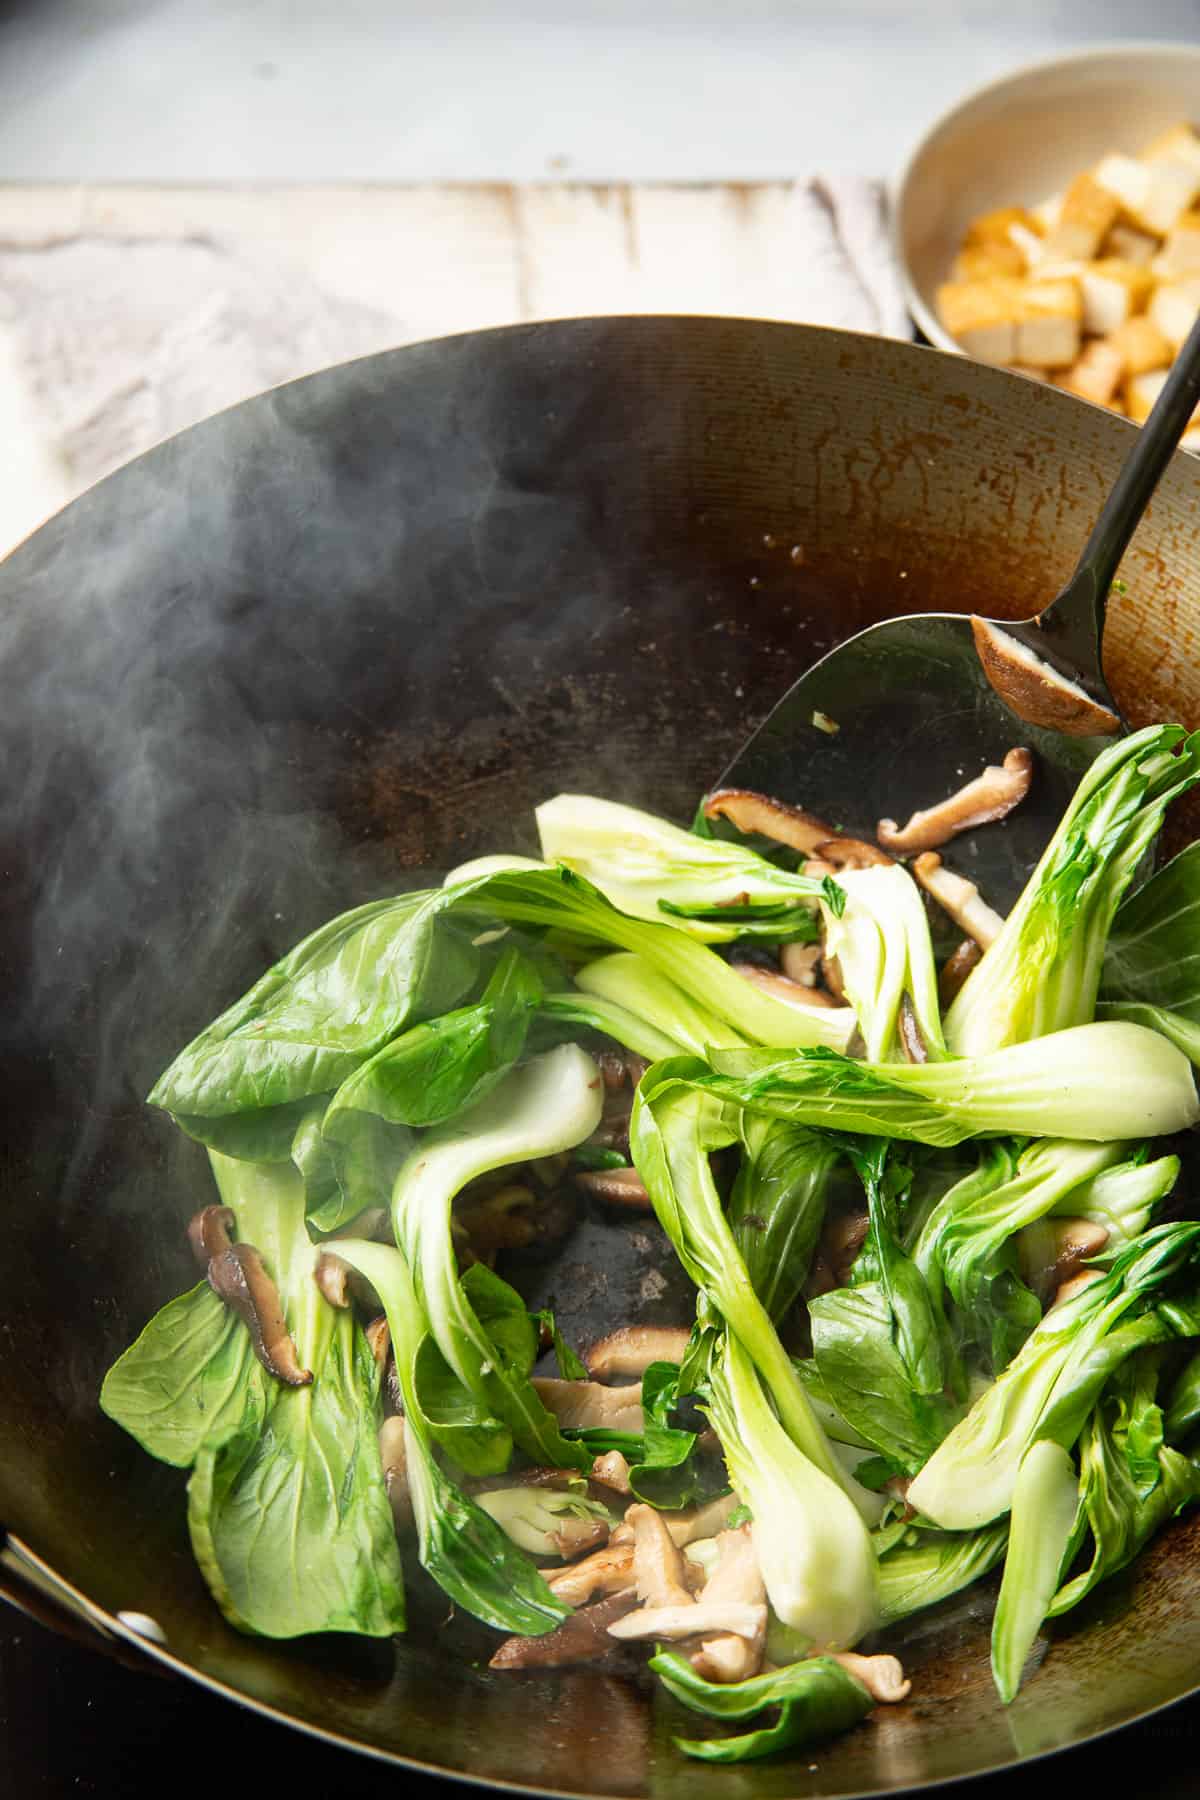 Baby bok choy and shiitake mushrooms cooking in a wok.